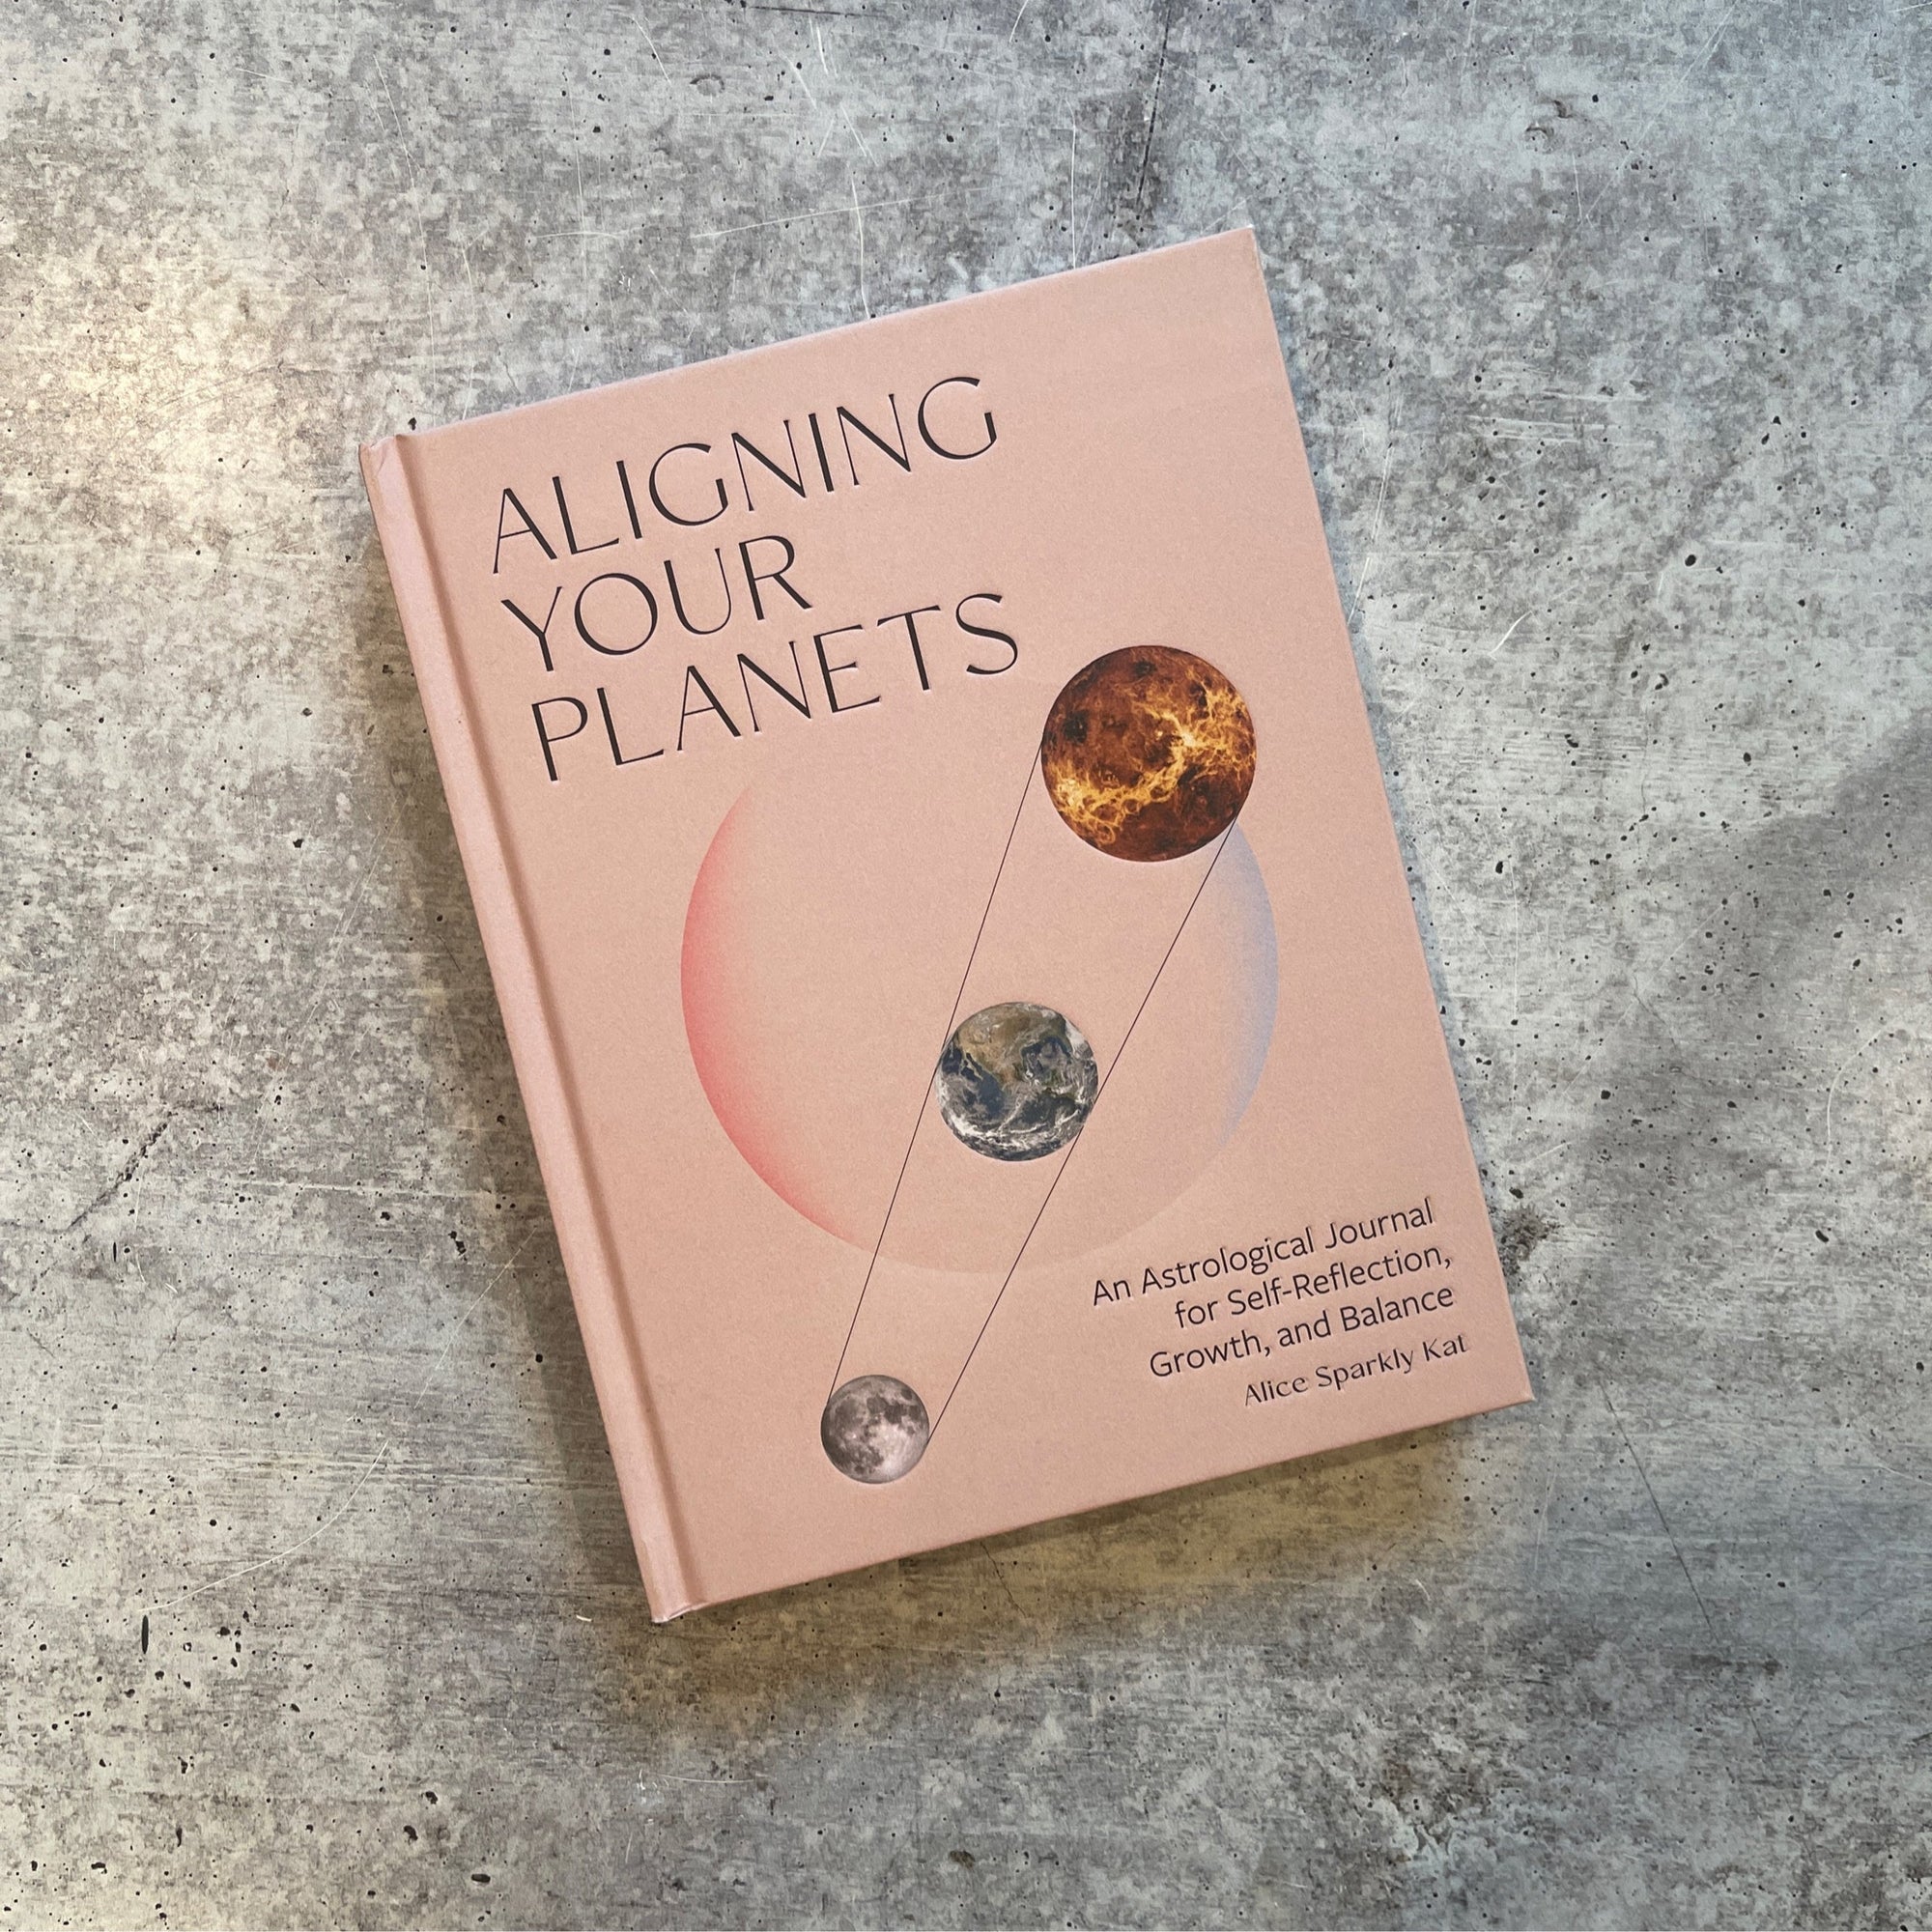 Aligning Your Planets